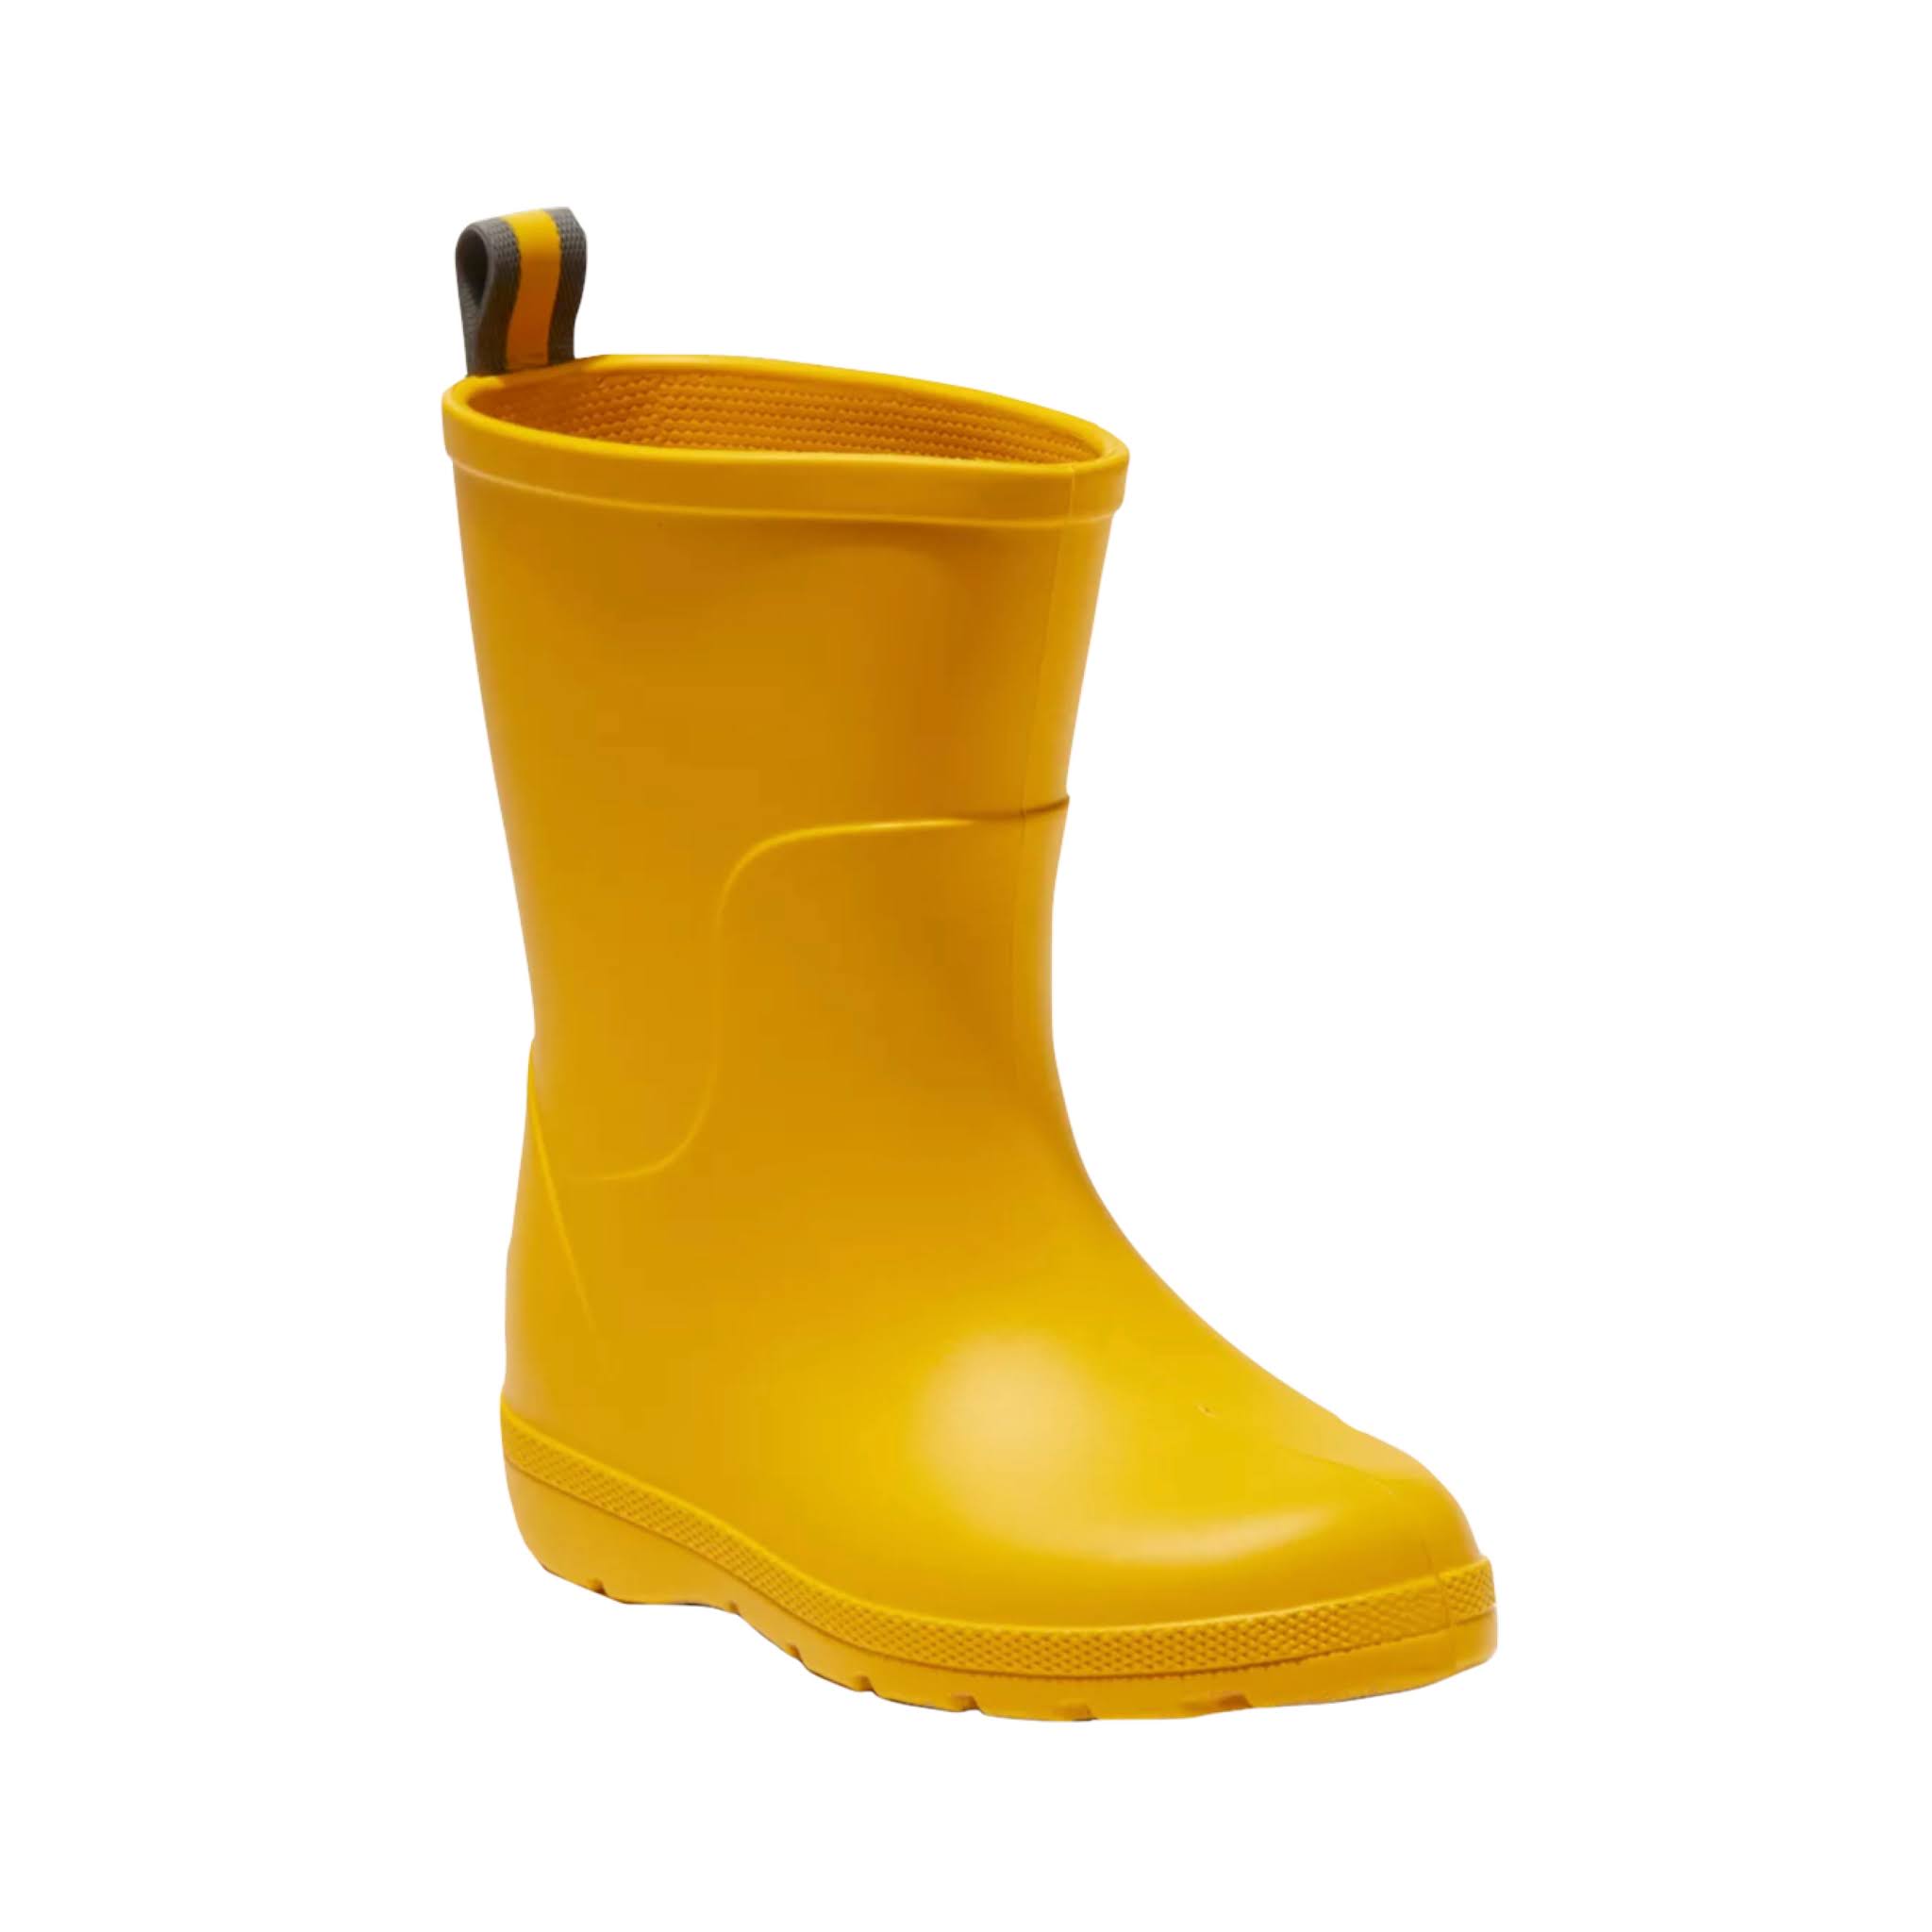 Toddler Yellow Rain Boots from Target